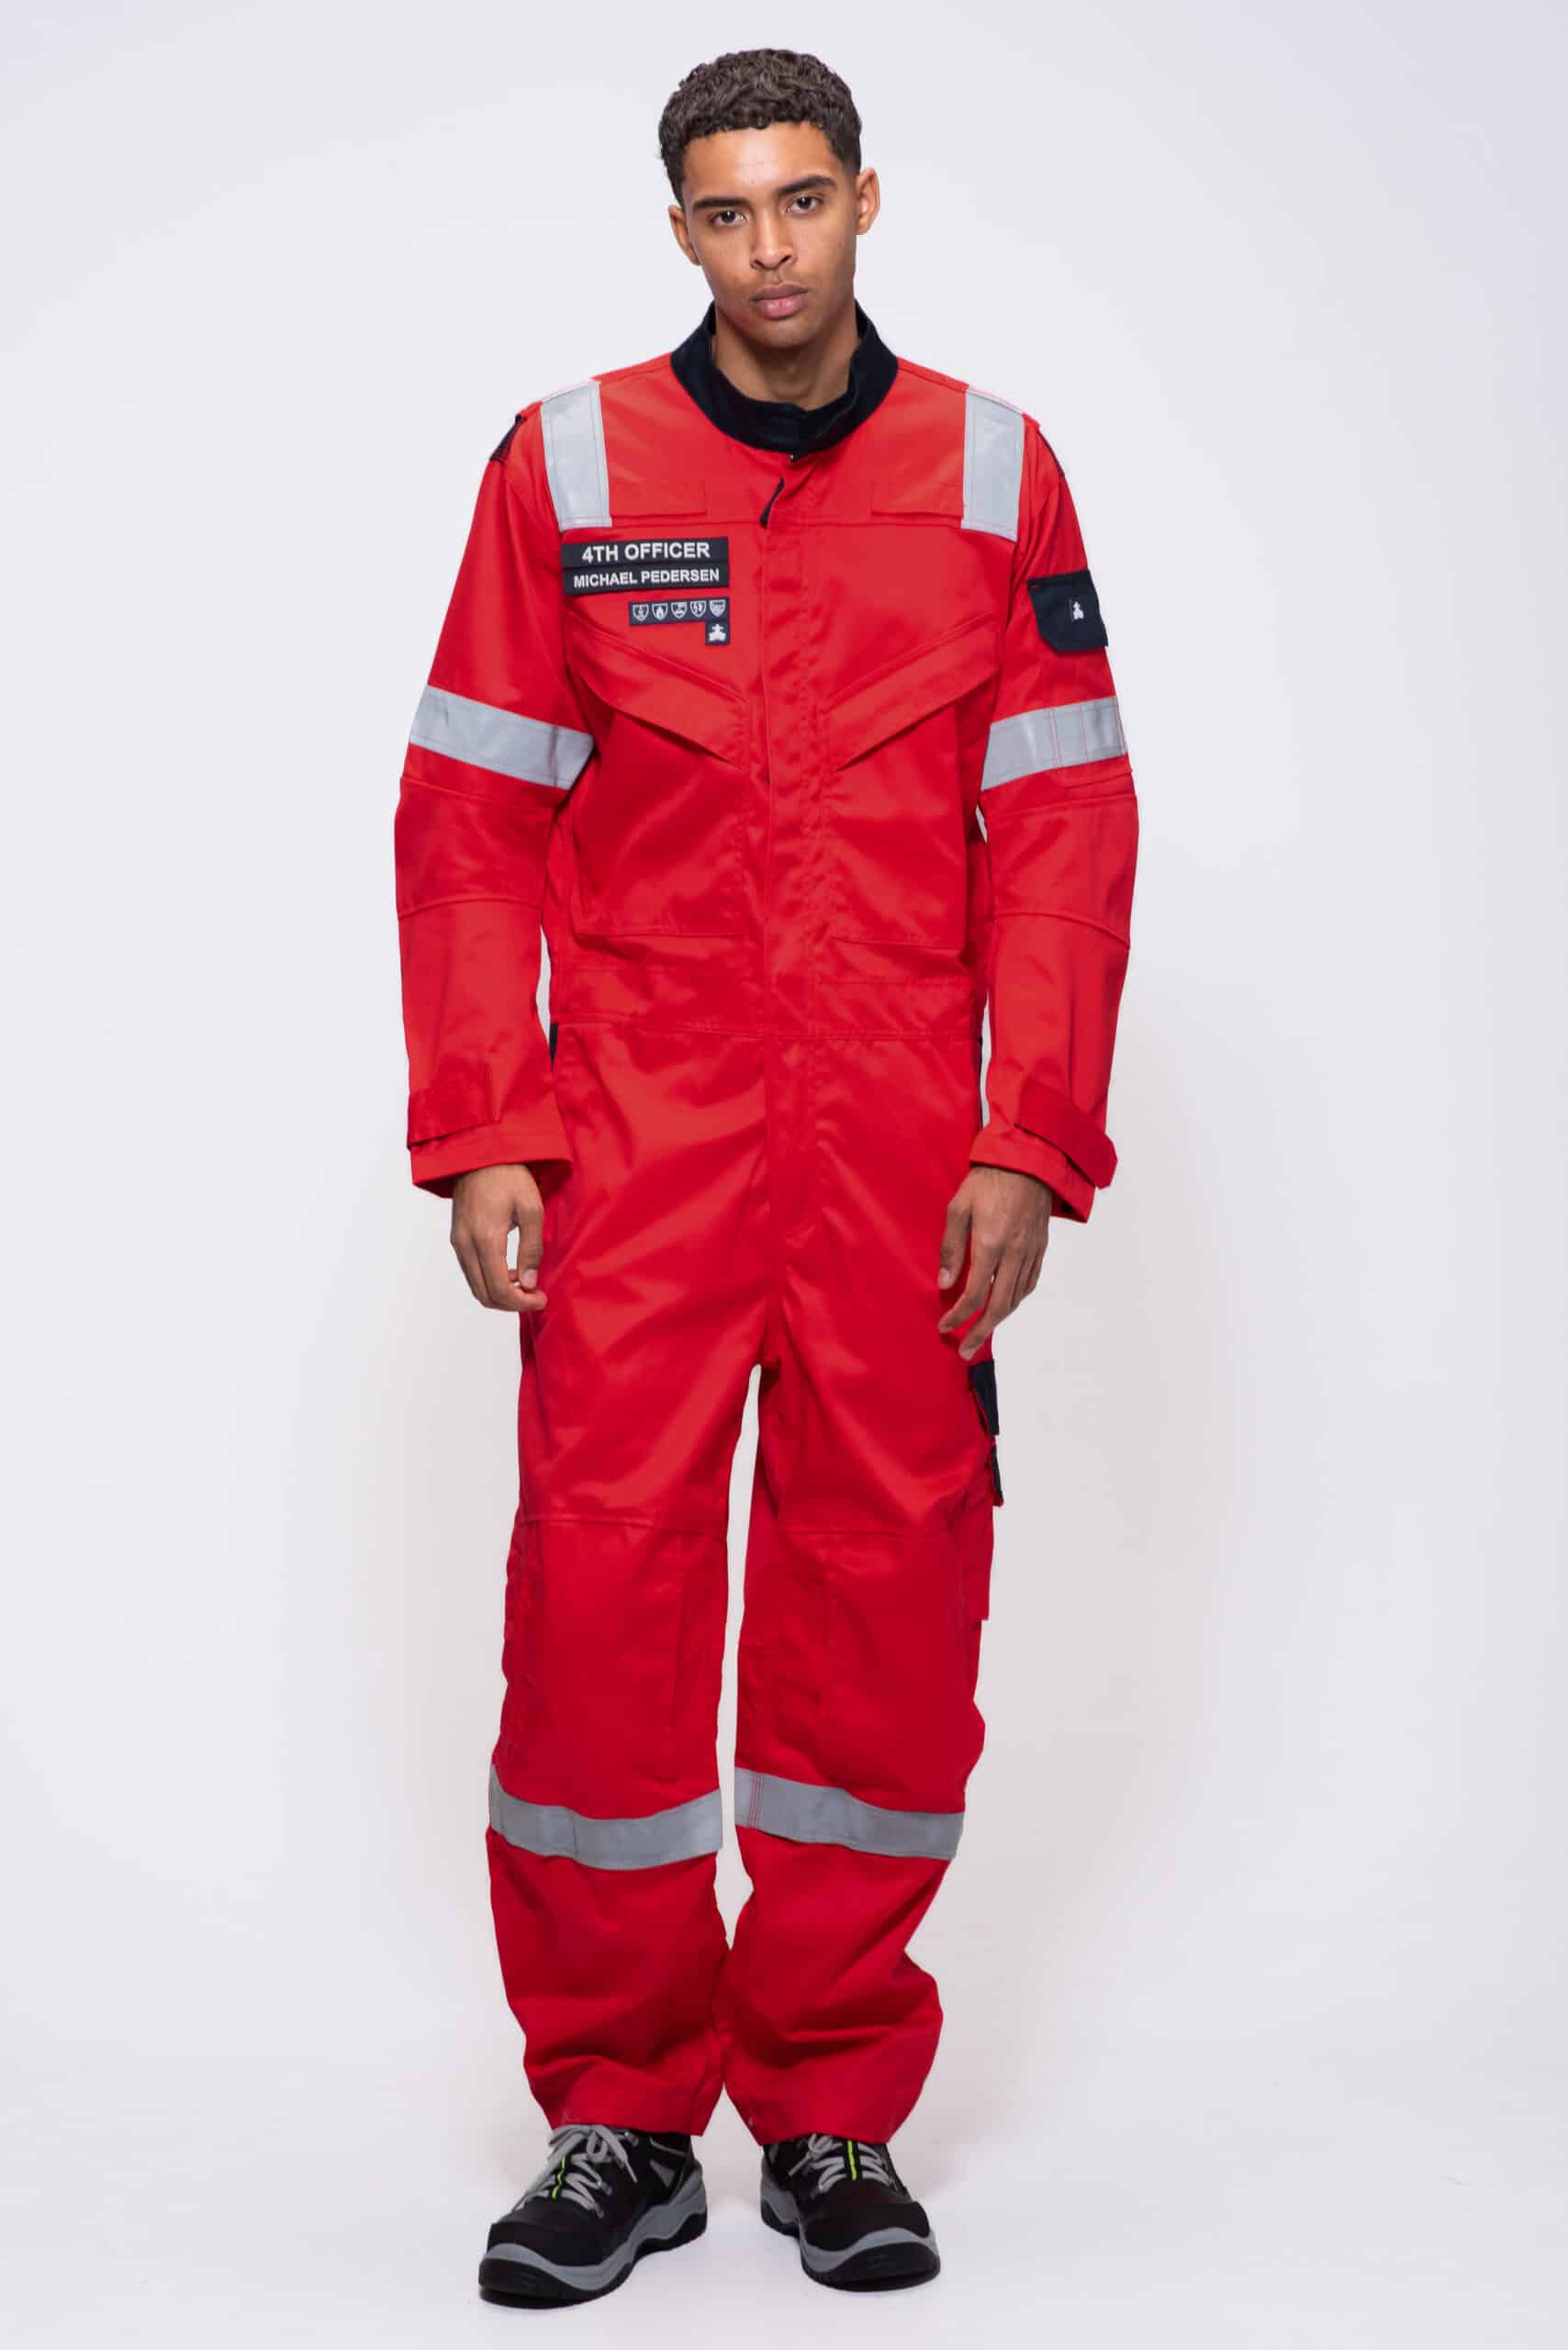 A Guide to Flame Resistant PPE: Definition, Examples and Industries